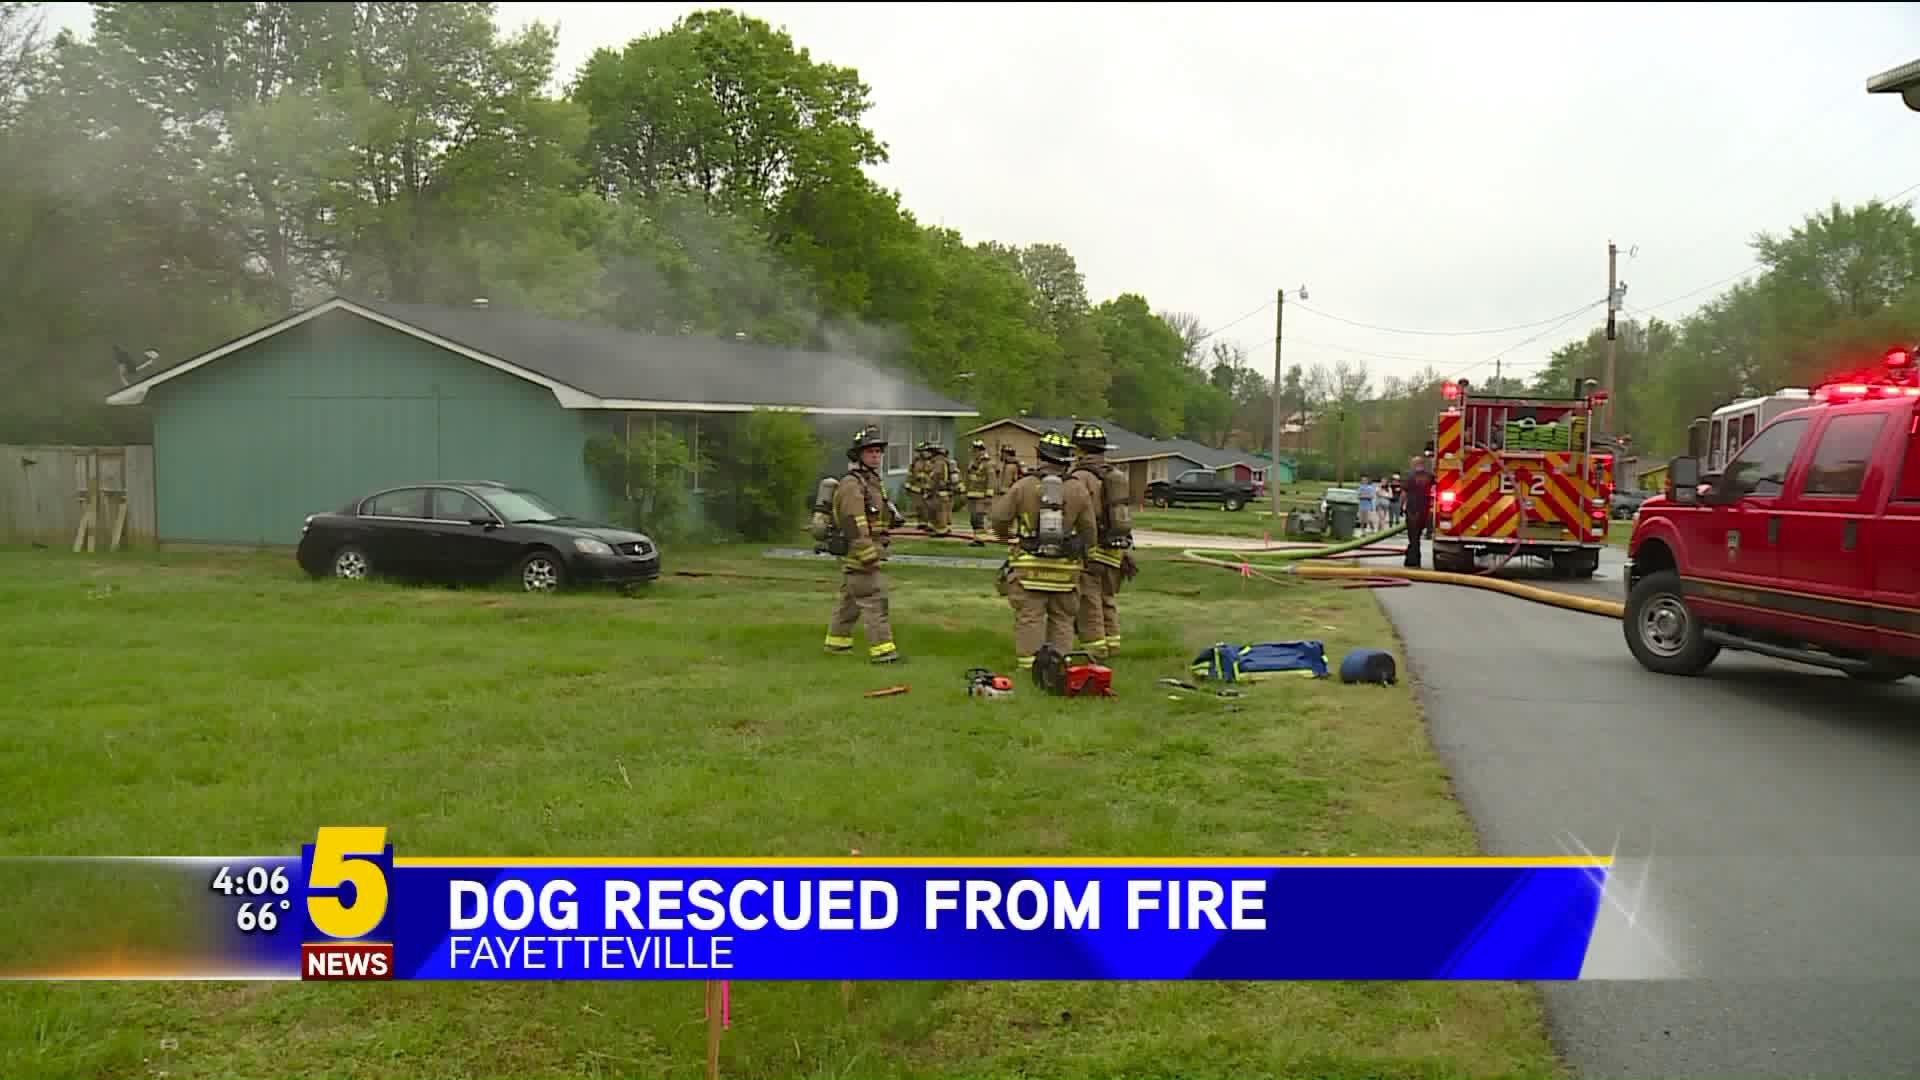 Dog Rescued from Fire in Fayetteville